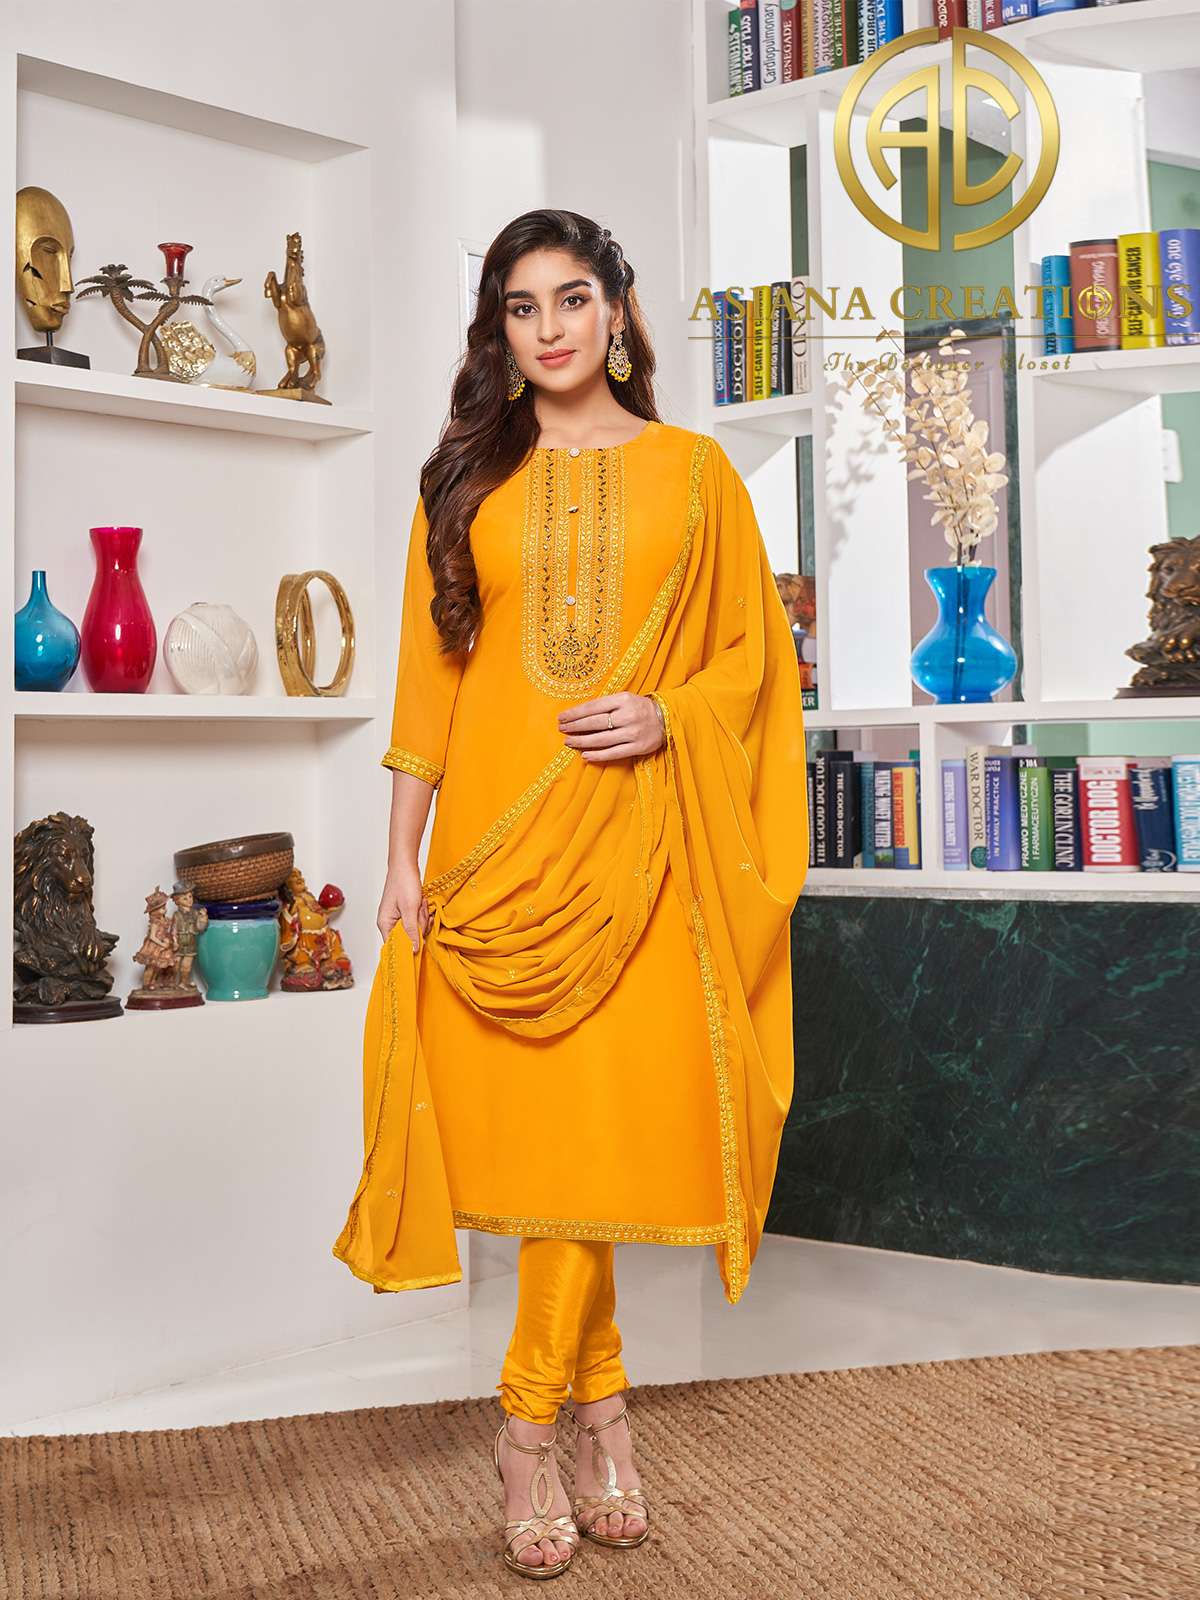 Georgette Embroidered Yellow Festive Wear Salwar Suit-2779